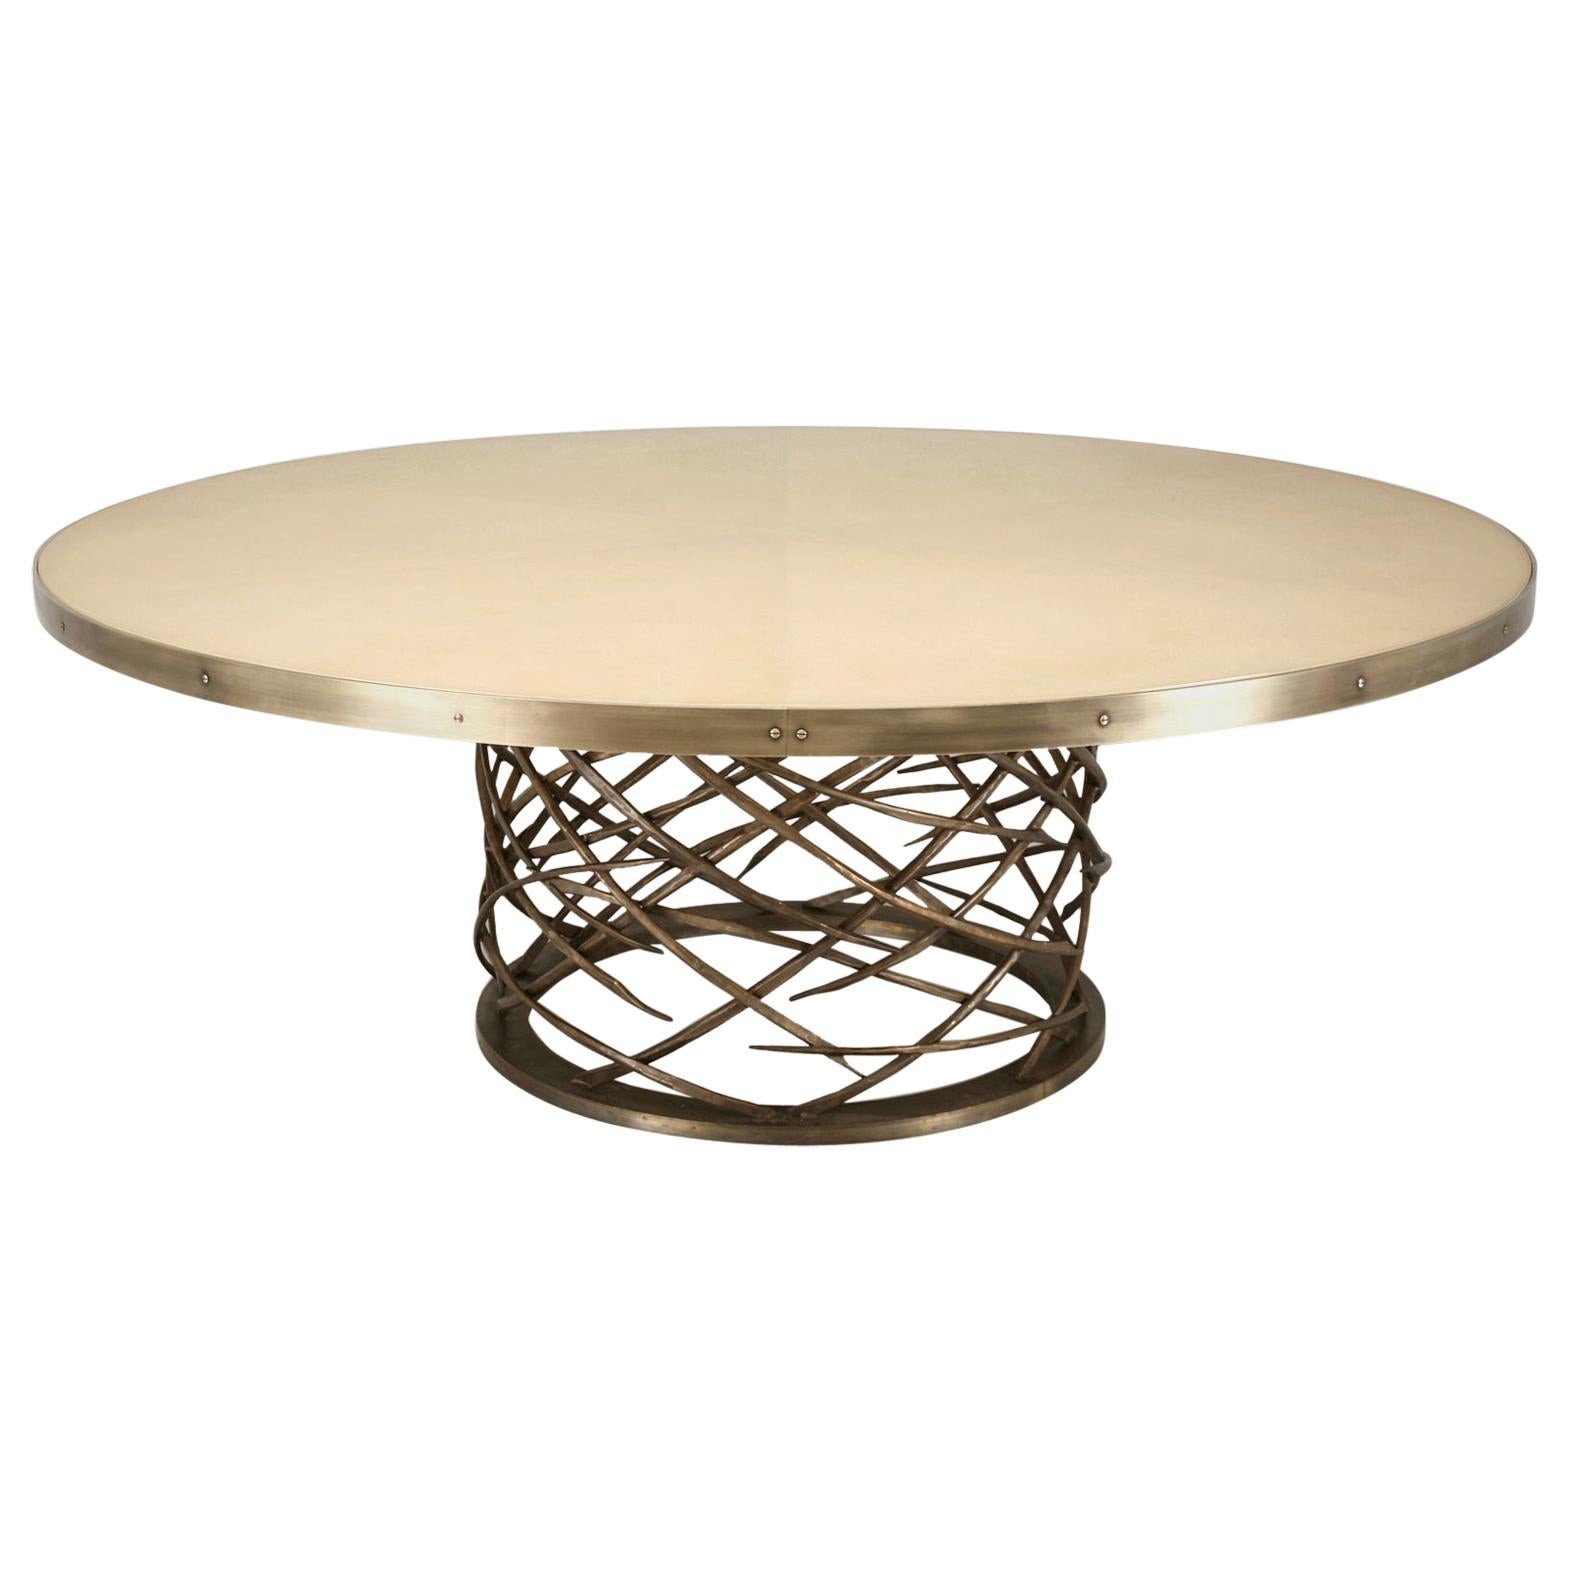 Old Plank's Handmade Woven Solid Bronze Table Base Available in Any Diameter